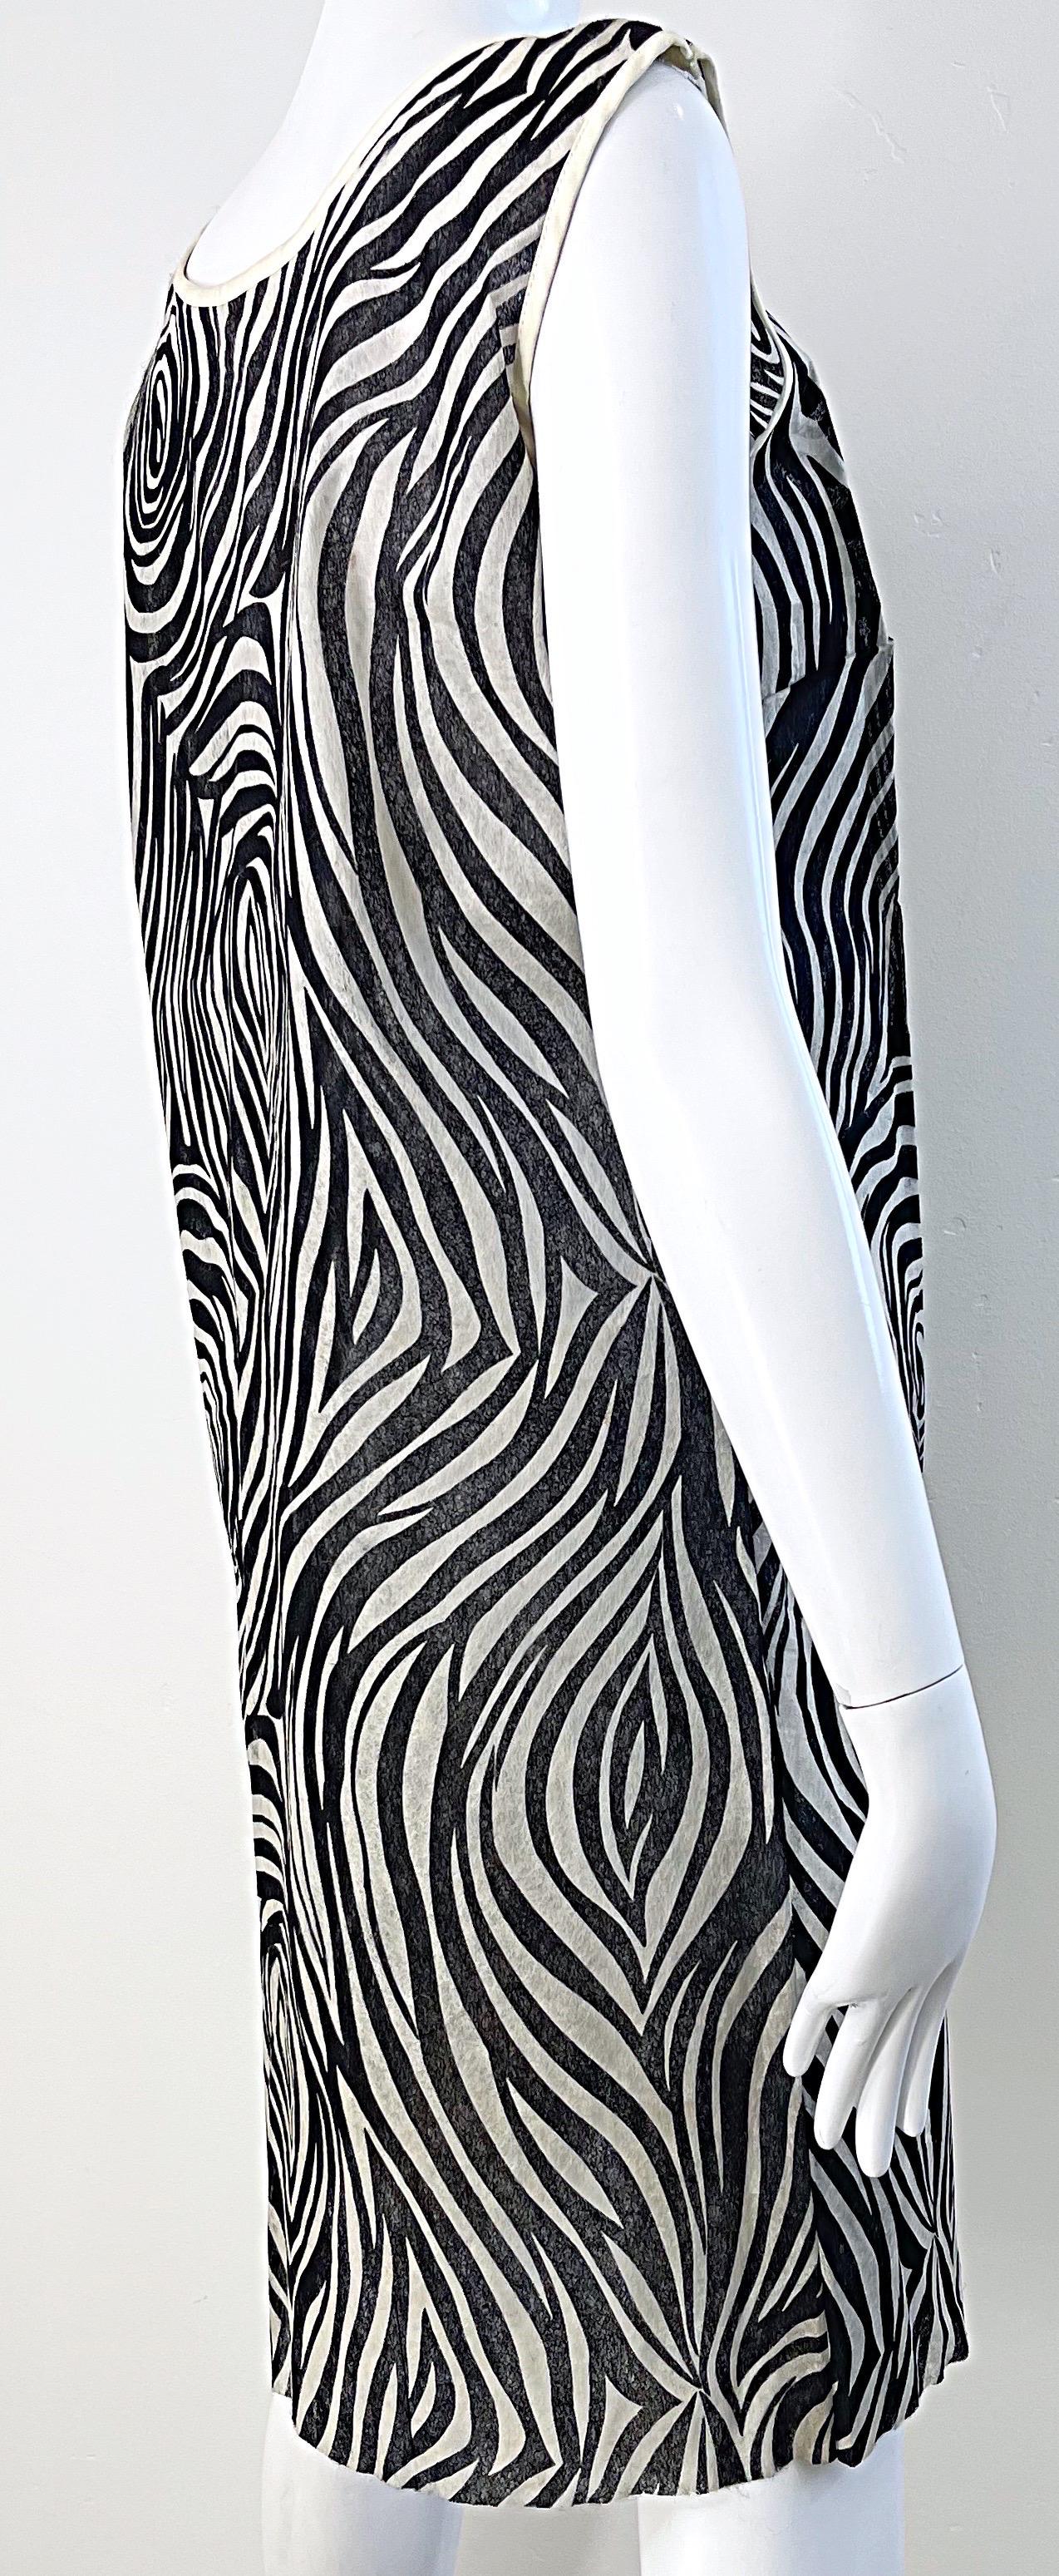 1960s Black and White Paper Shift Dress Psychedelic Zebra Print Mod Vintage 60s In Excellent Condition For Sale In San Diego, CA